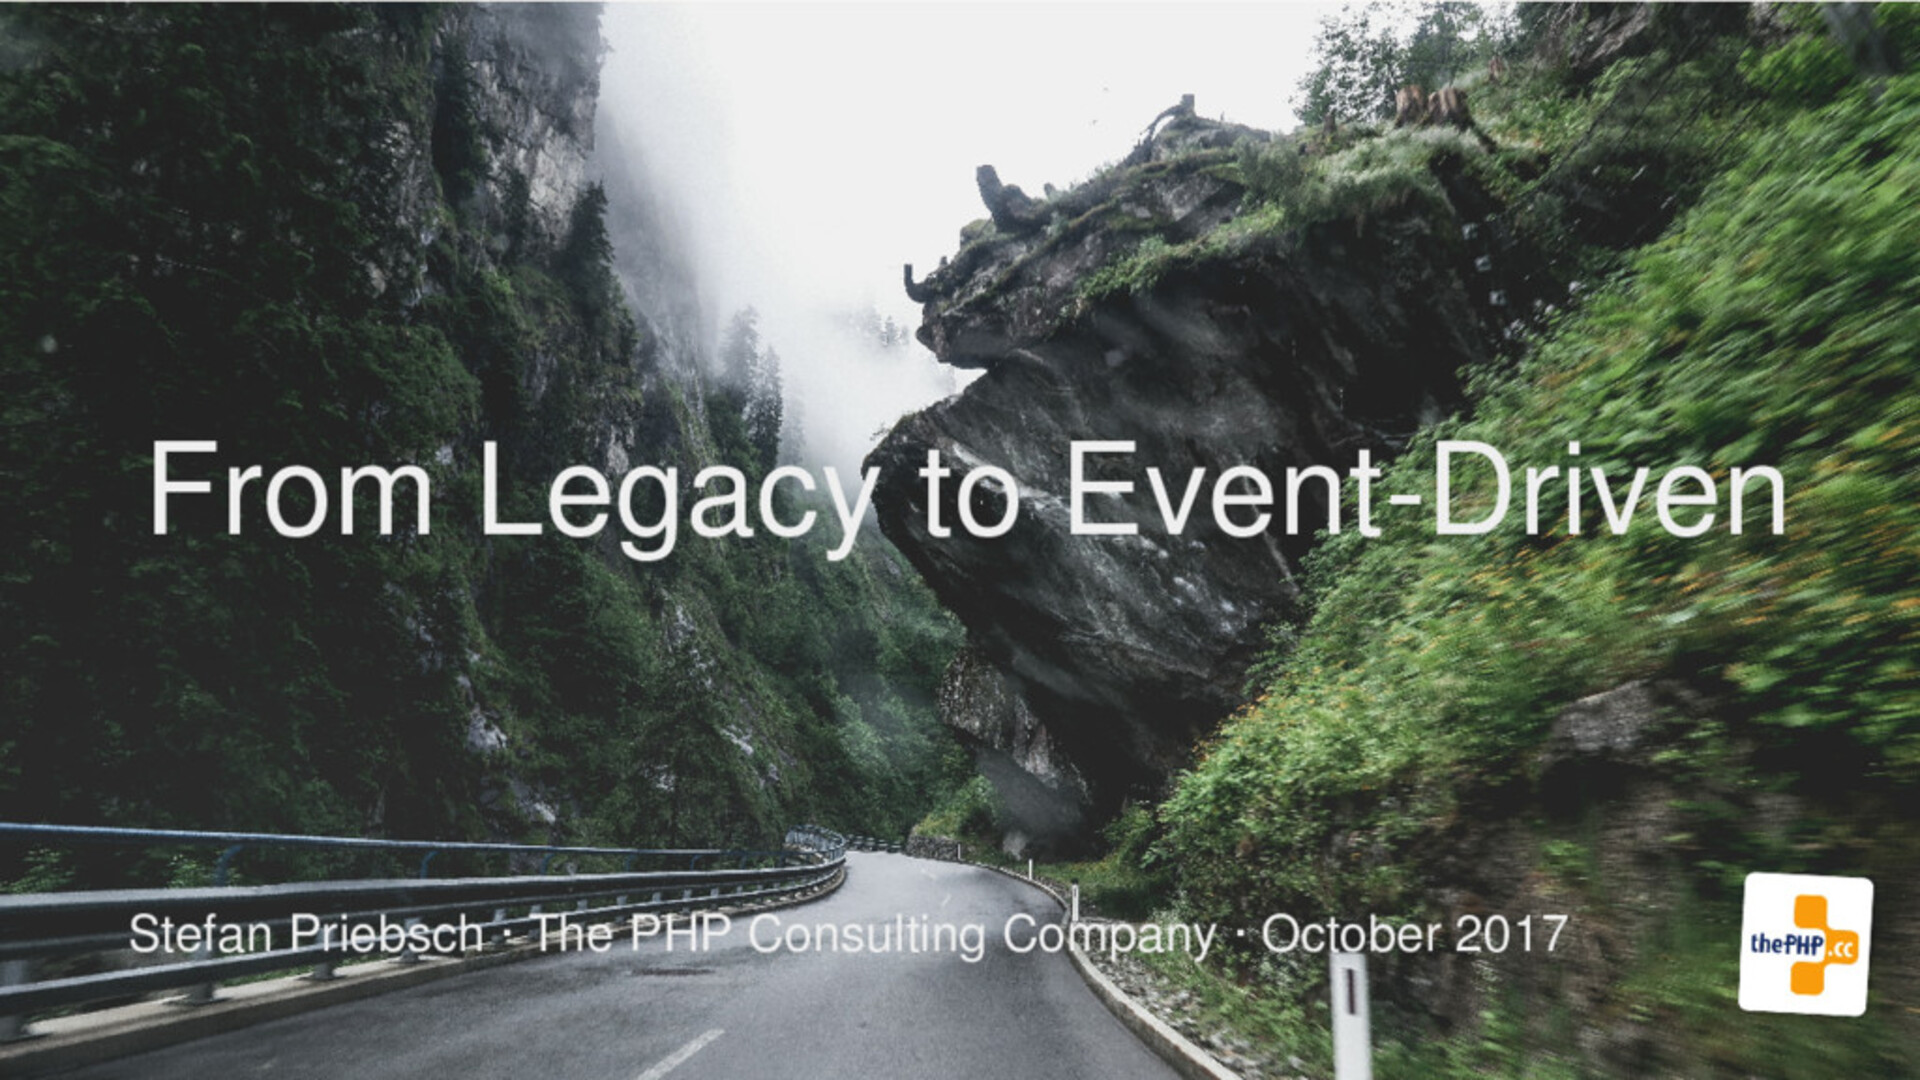 From Legacy to Event-Driven